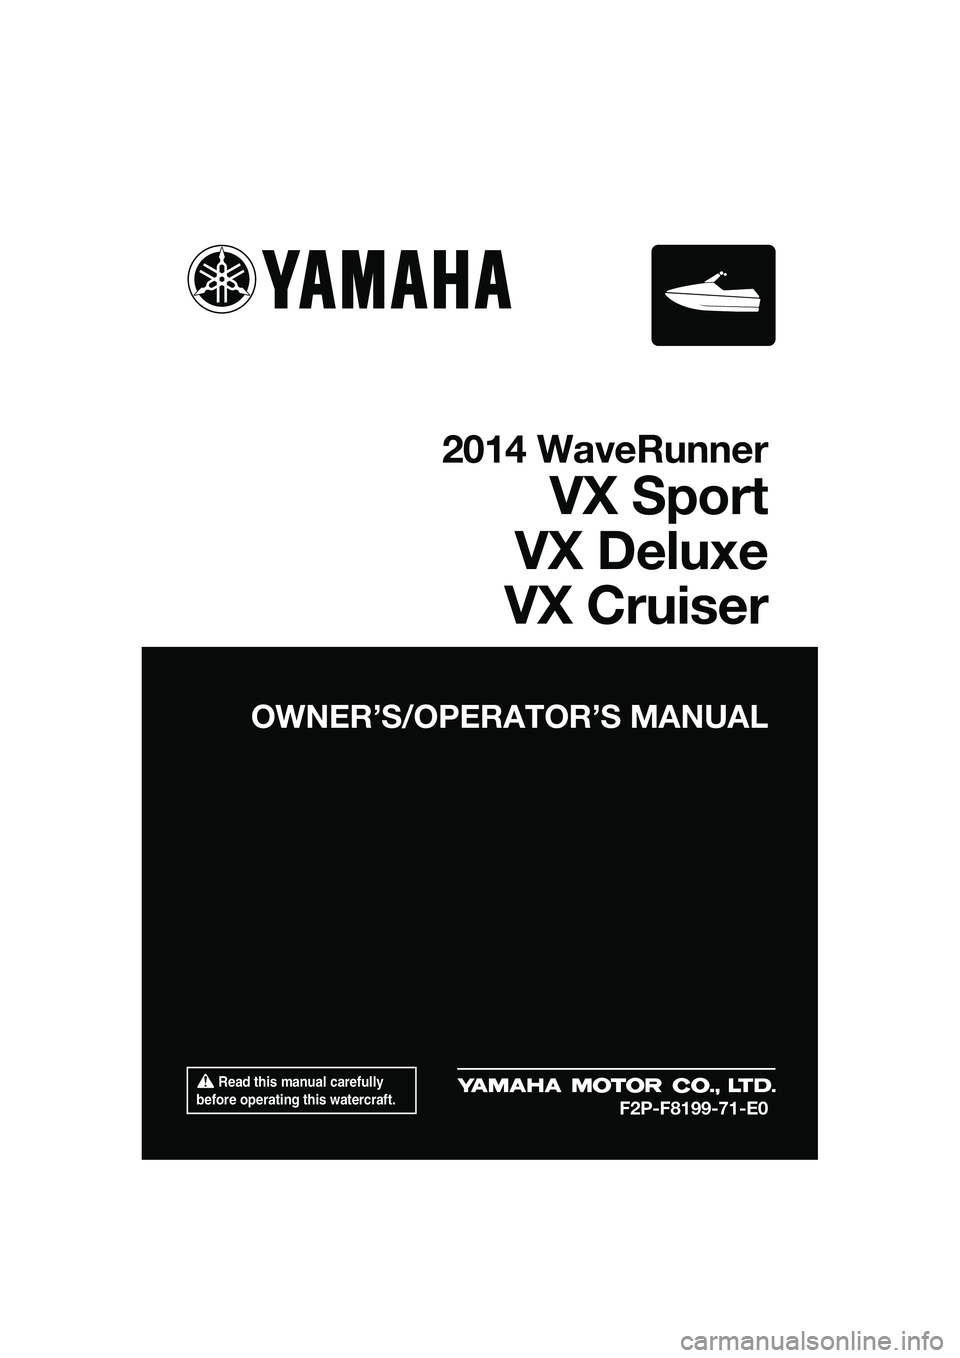 YAMAHA VX SPORT 2014  Owners Manual  Read this manual carefully 
before operating this watercraft.
OWNER’S/OPERAT OR’S MANUAL
2014 WaveRunner
VX Sport
VX Deluxe
VX Cruiser
F2P-F8199-71-E0
UF2P71E0.book  Page 1  Wednesday, July 10, 2